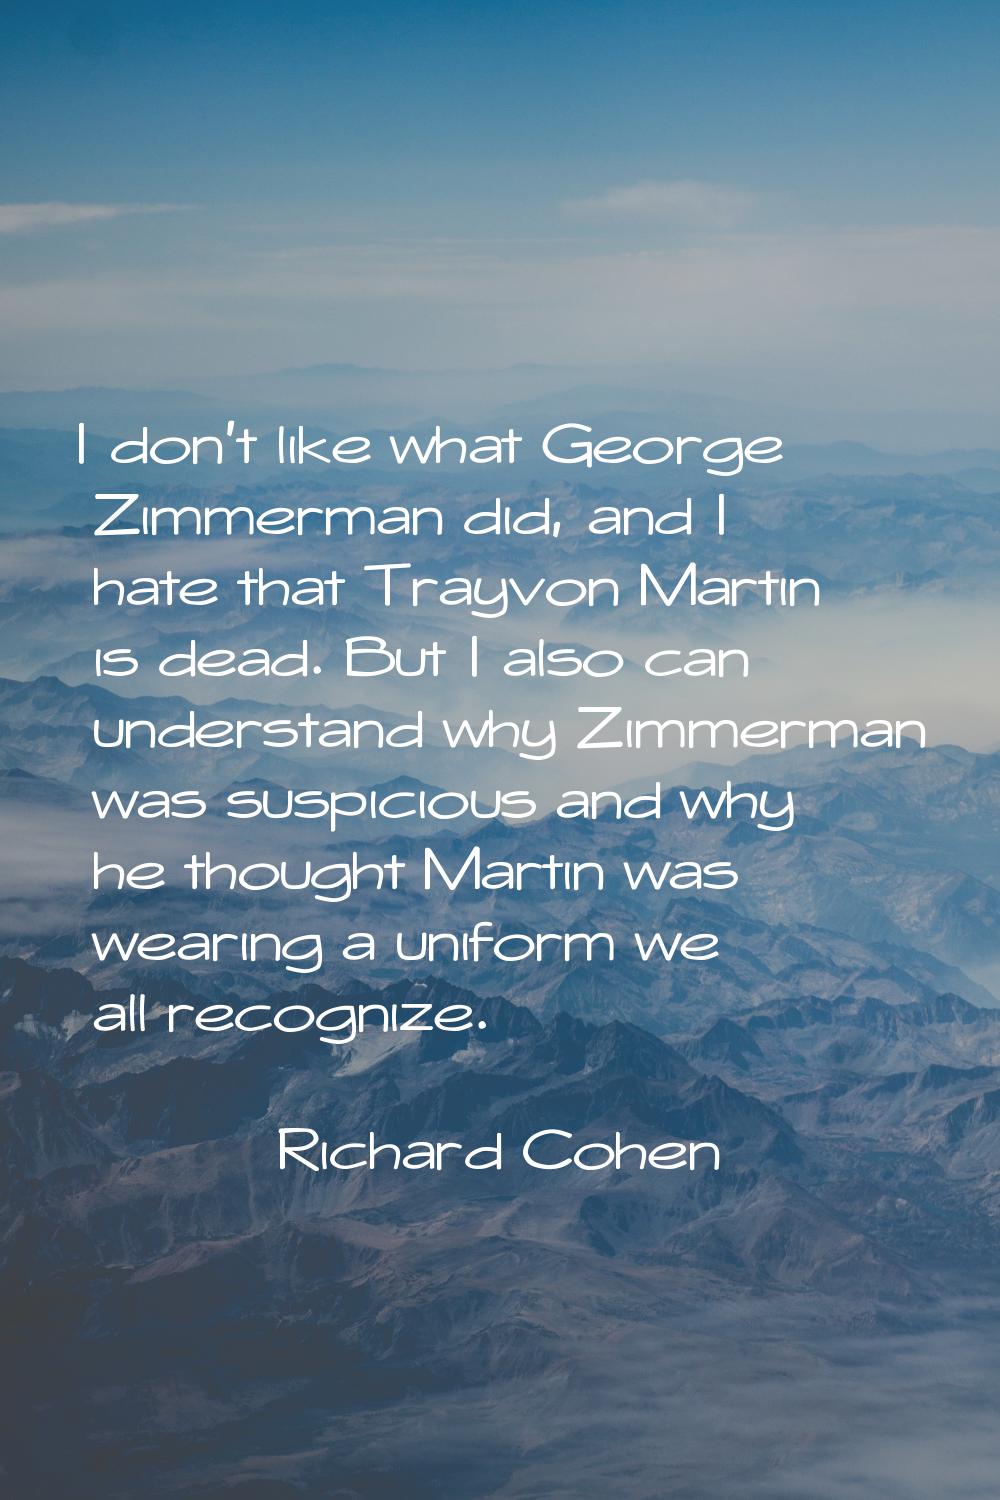 I don't like what George Zimmerman did, and I hate that Trayvon Martin is dead. But I also can unde